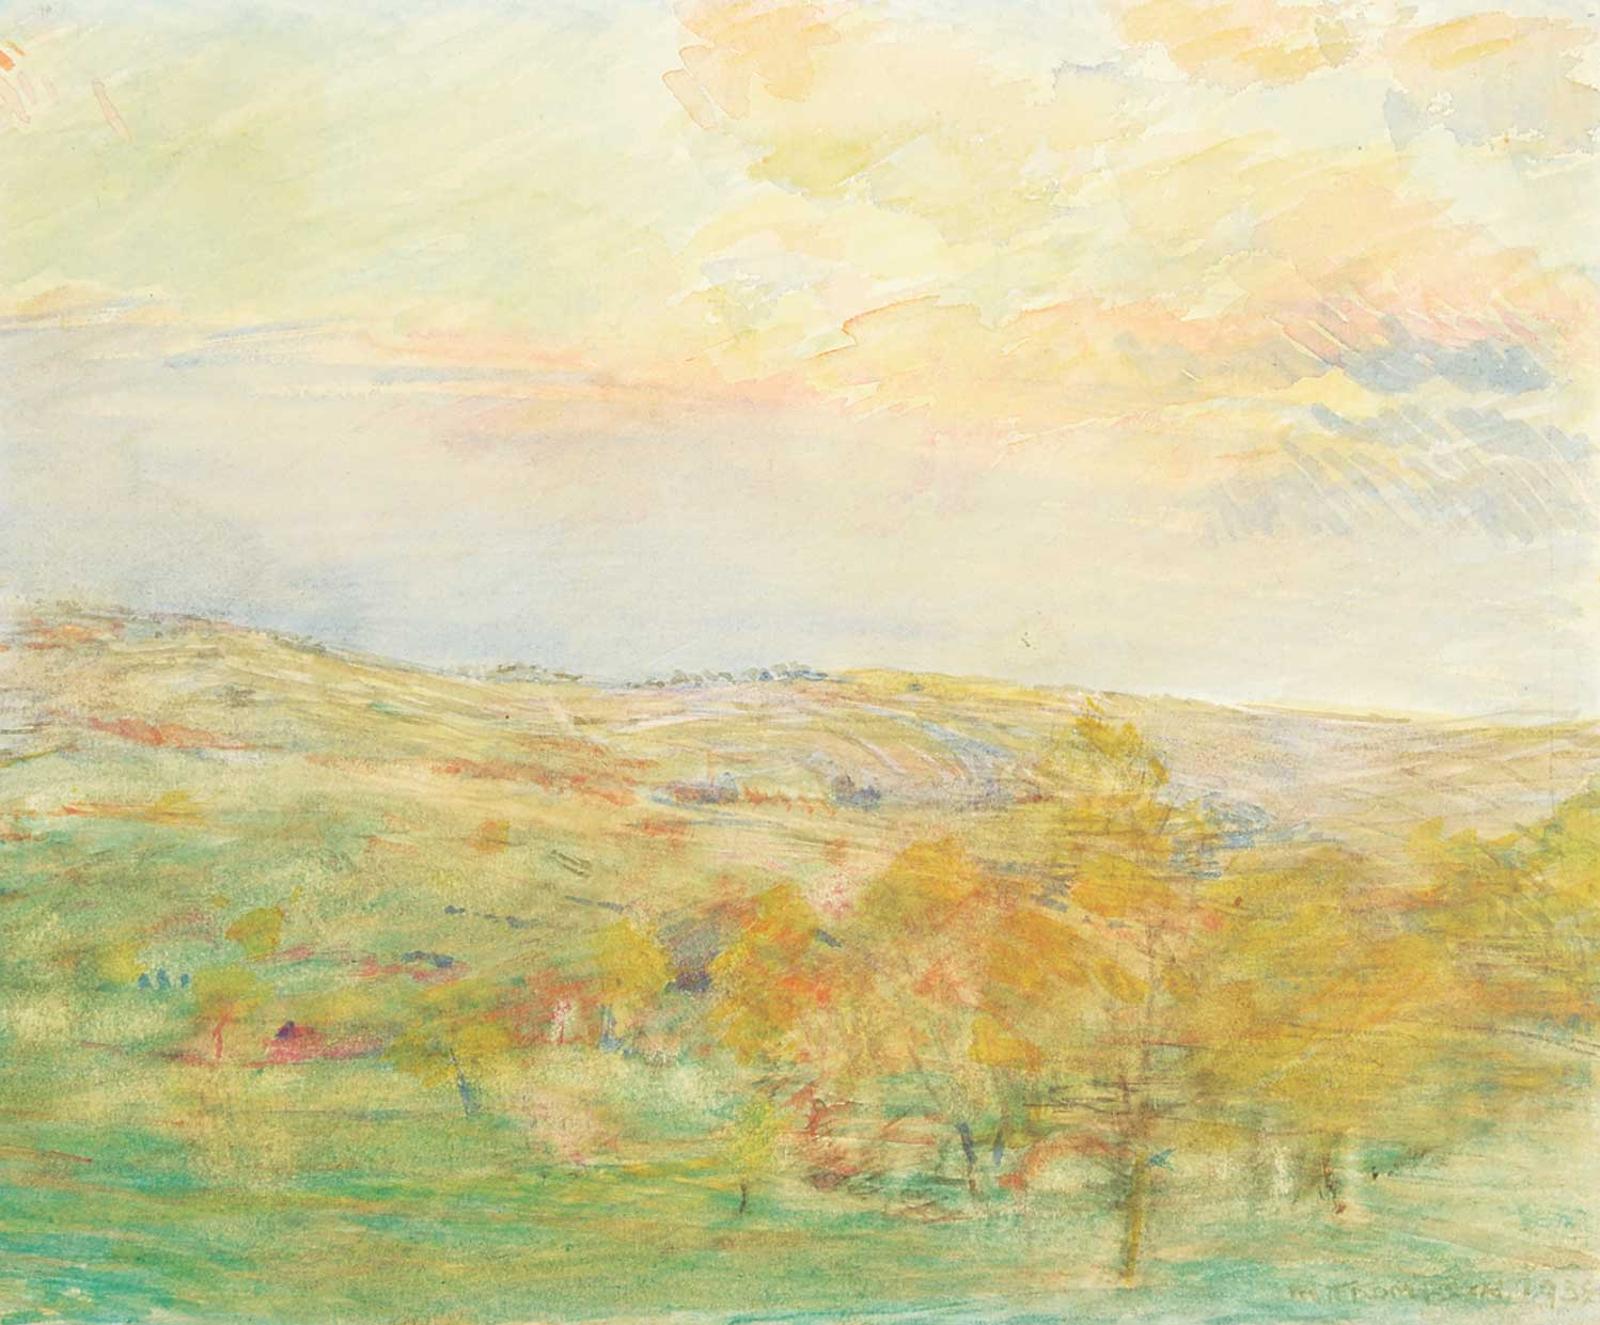 M. Thompson - Untitled - September in the Foothills